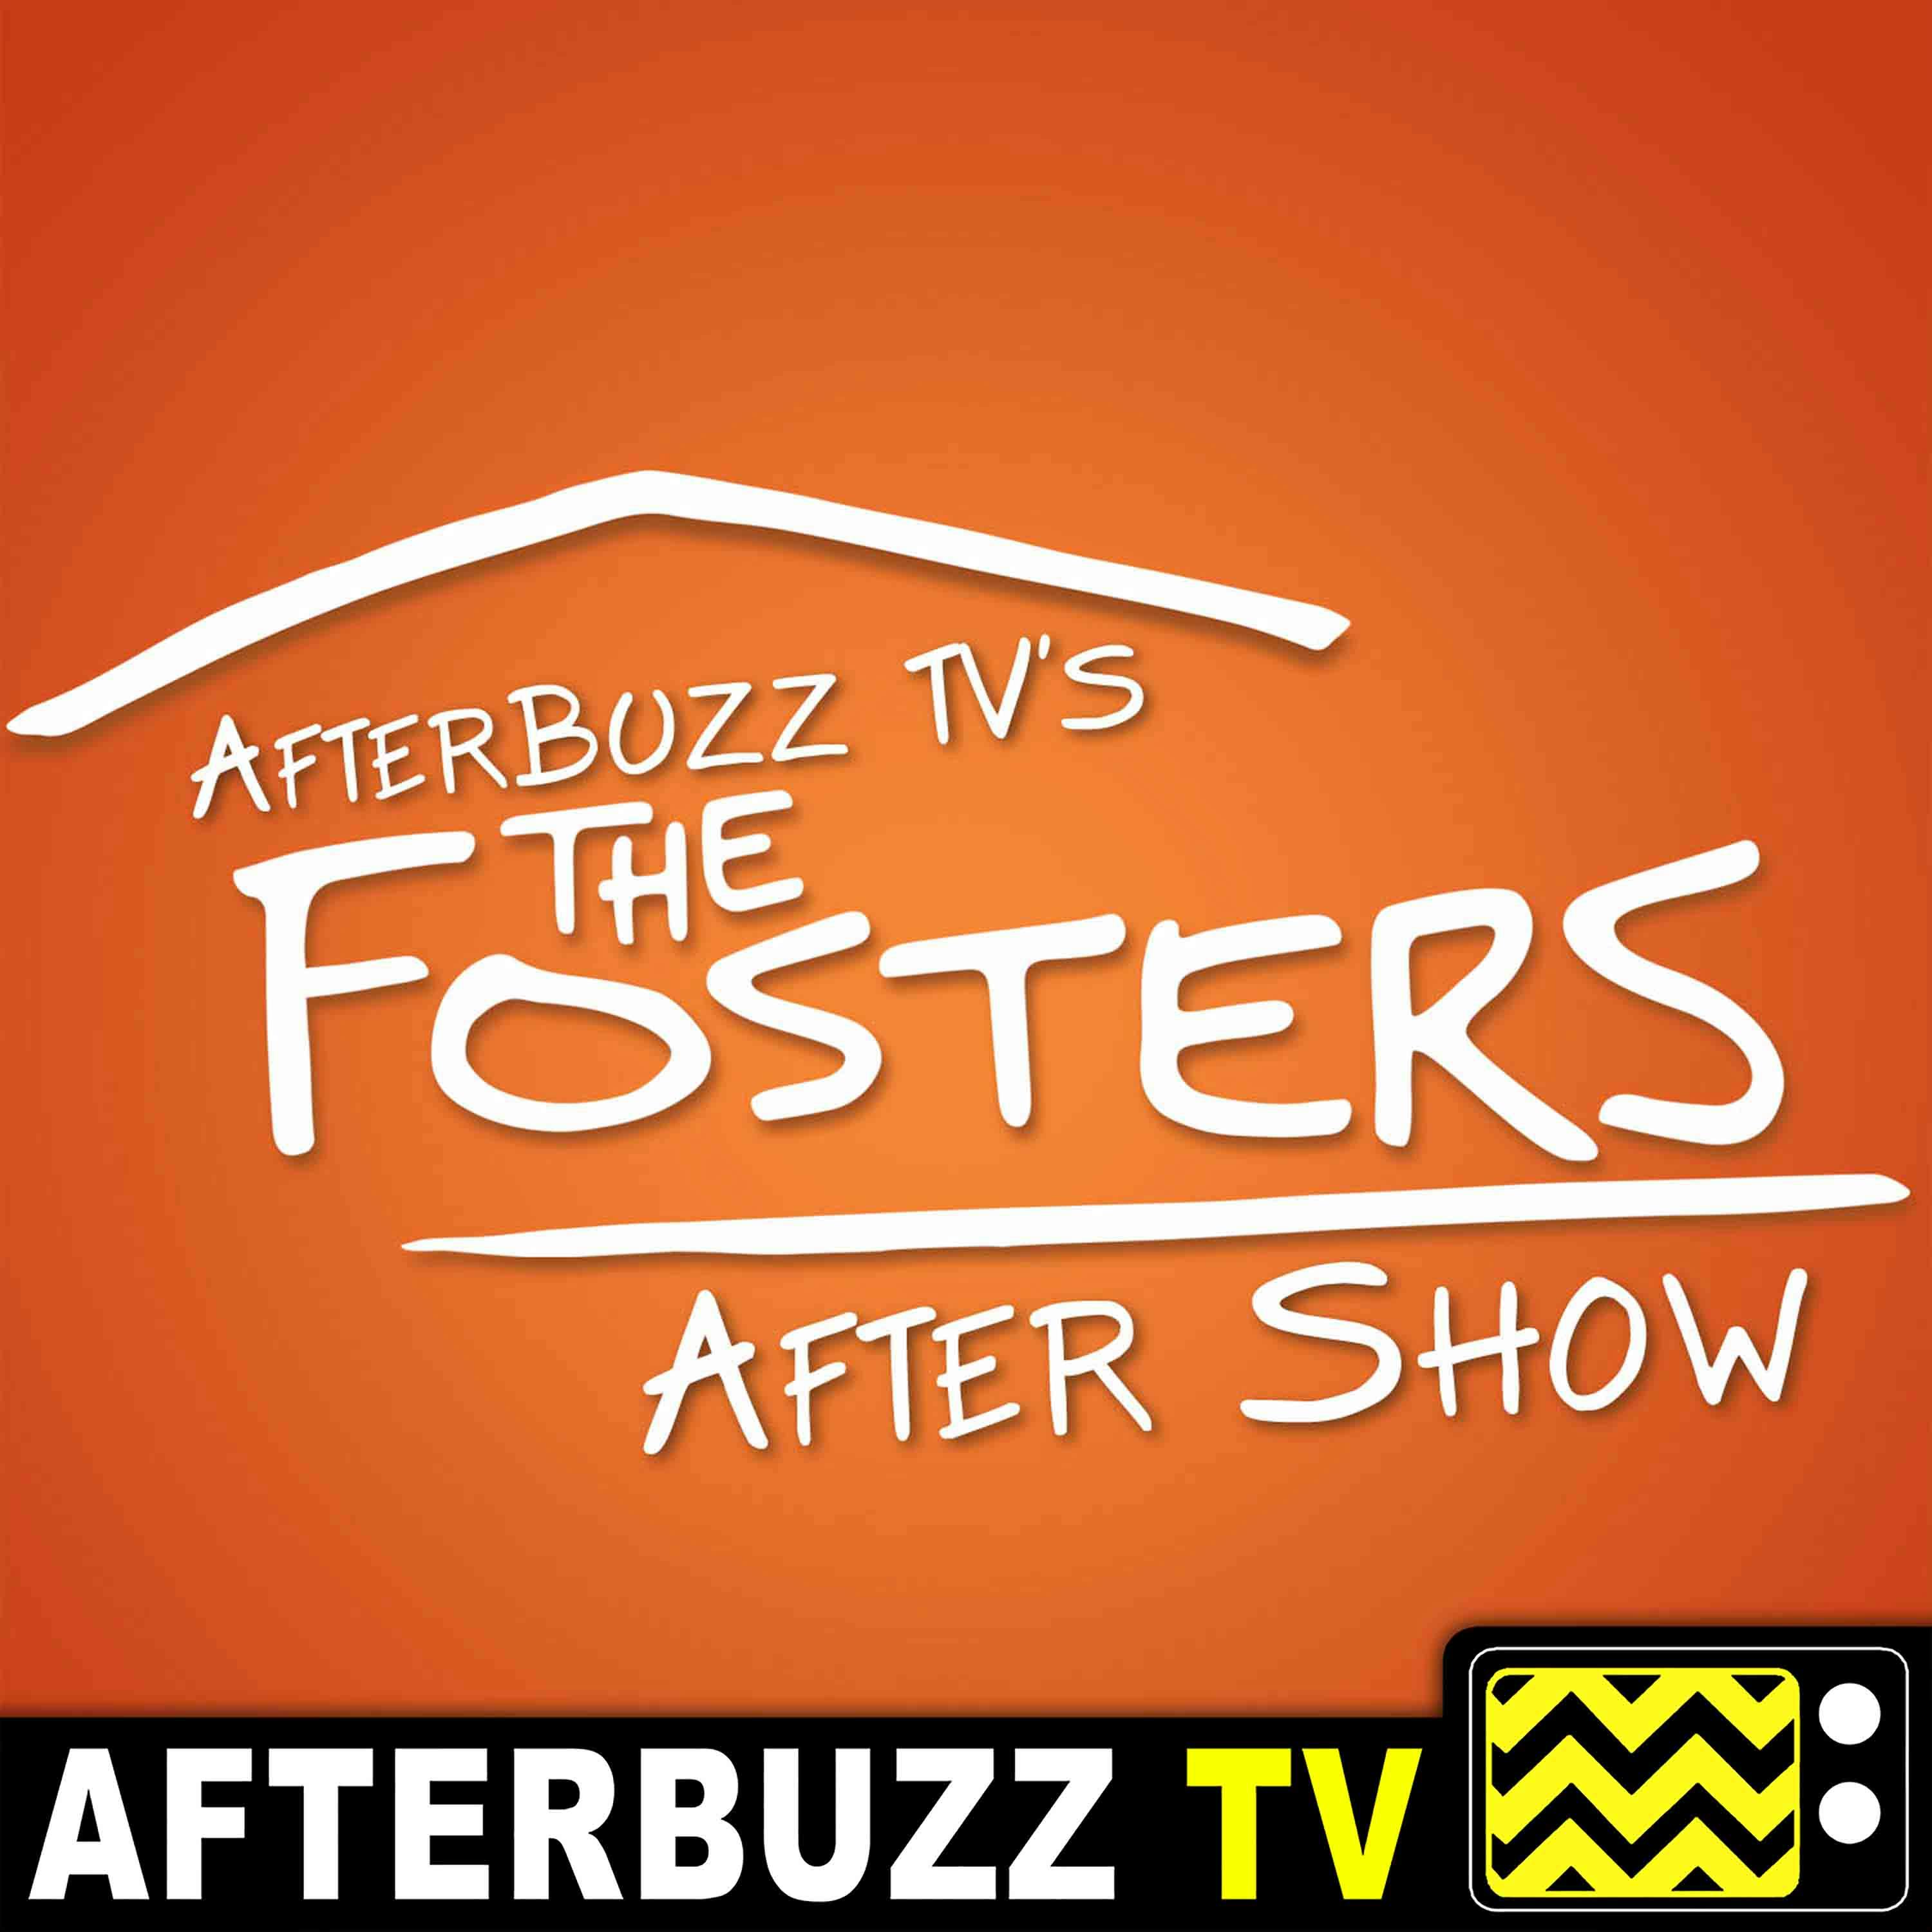 The Fosters S:3 | Annika Marks Guests on Sixteen E:17 | AfterBuzz TV AfterShow